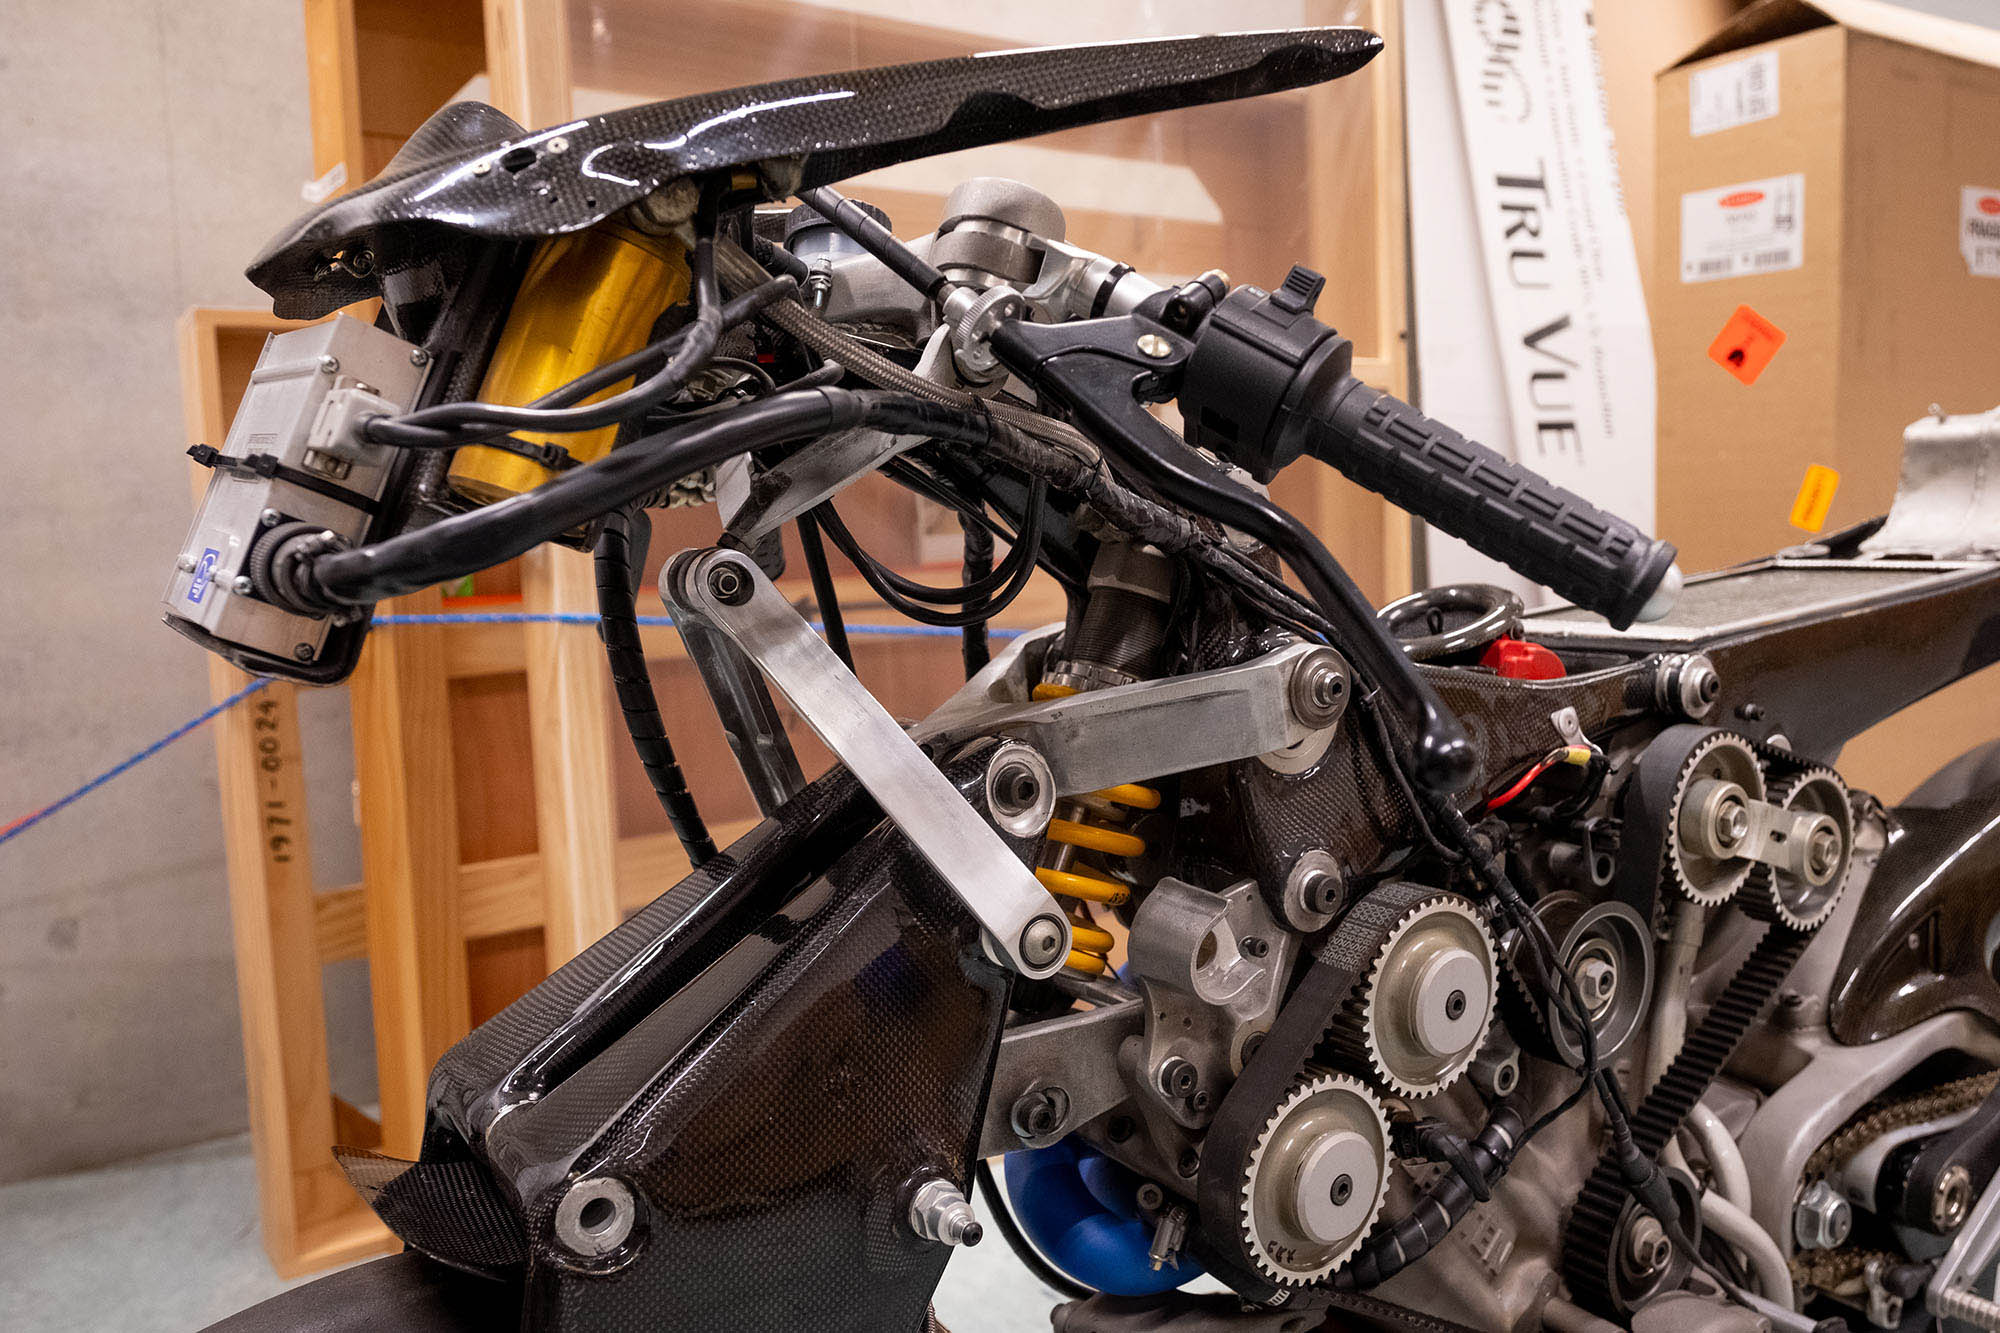 Close up view of the front of the Britten Bike showing its suspension system